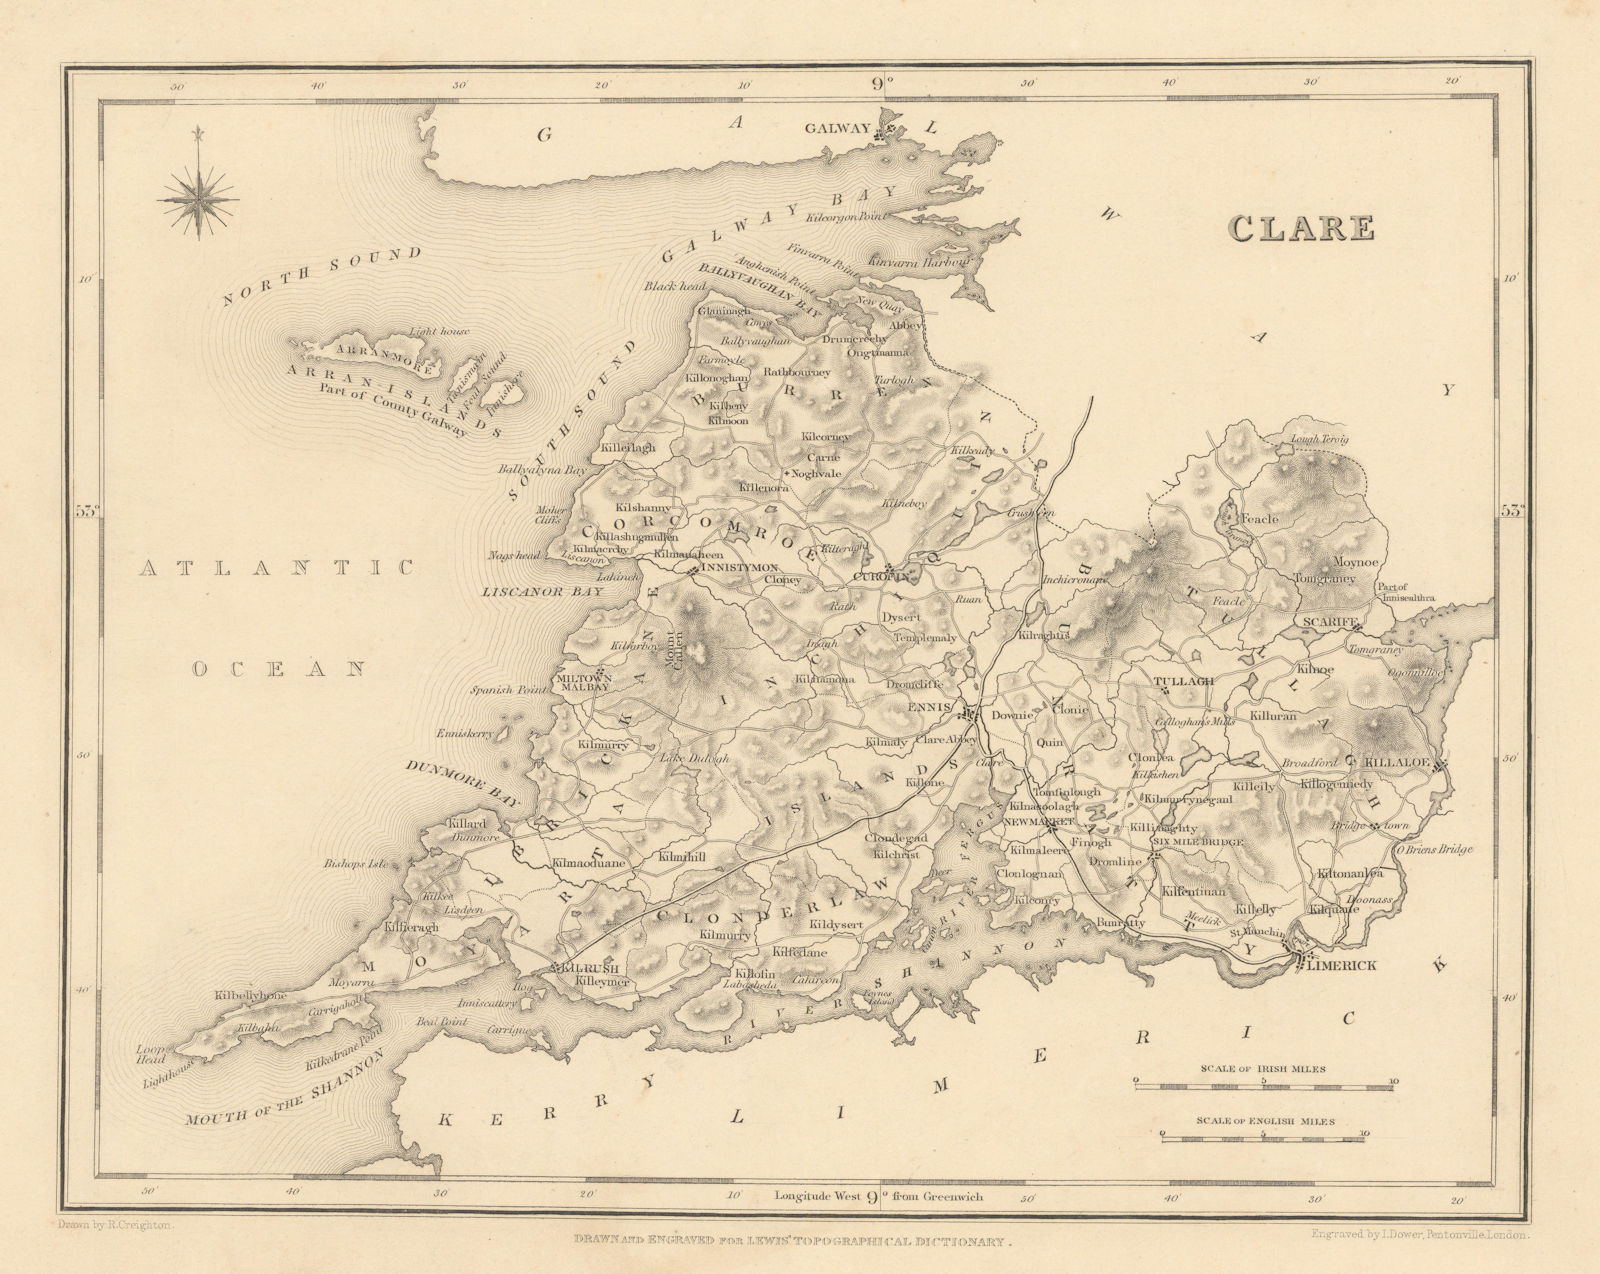 COUNTY CLARE antique map for LEWIS by CREIGHTON & DOWER - Ireland 1837 old